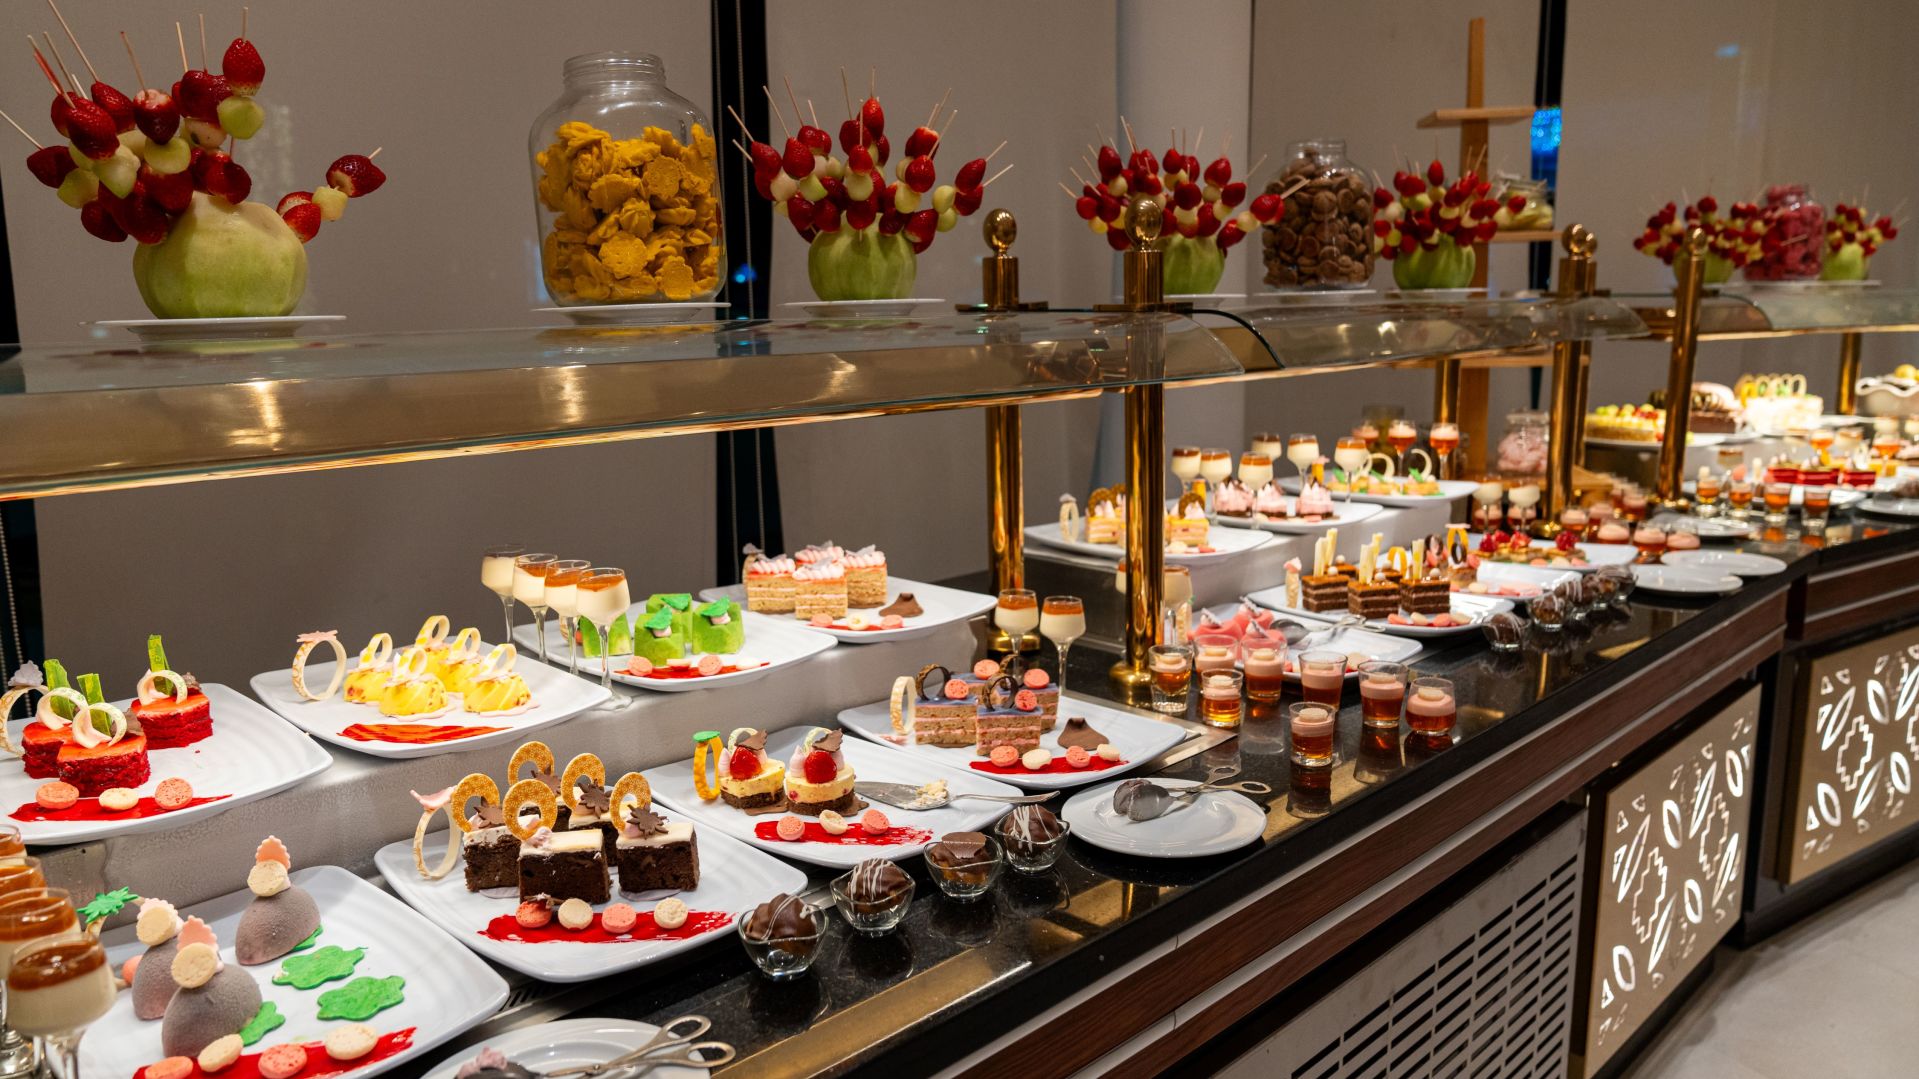 A Display Of Desserts